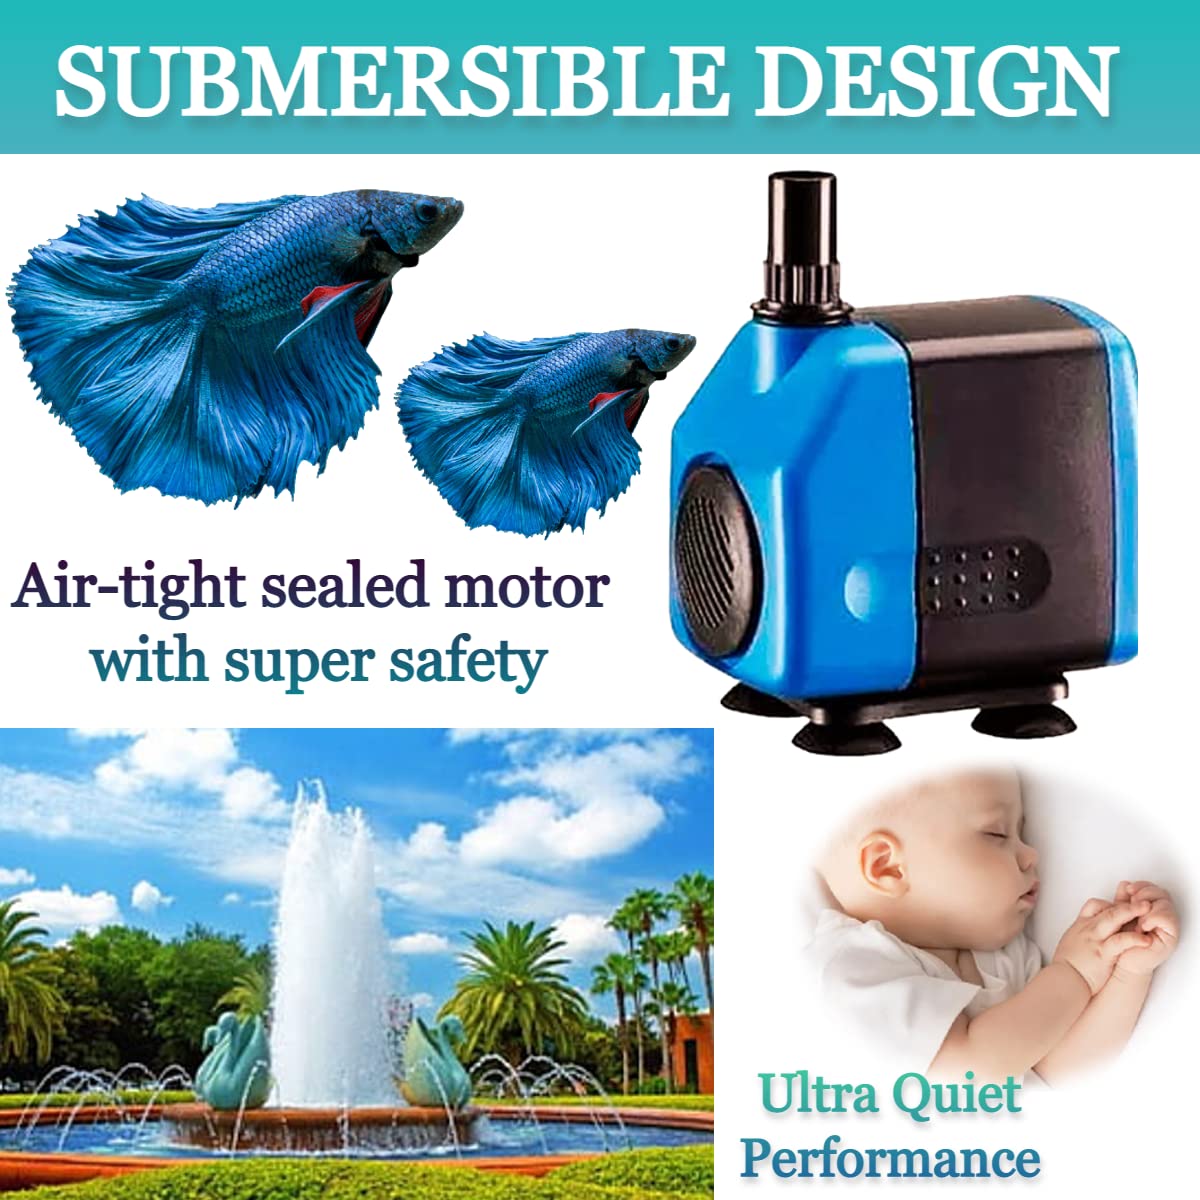 Despacito Submersible Water Pump Power: 60w Max Flow: 3000L/H Aquarium Fountain Fish Pond Garden submersible water pump Suitable For Both Fresh And Saltwater